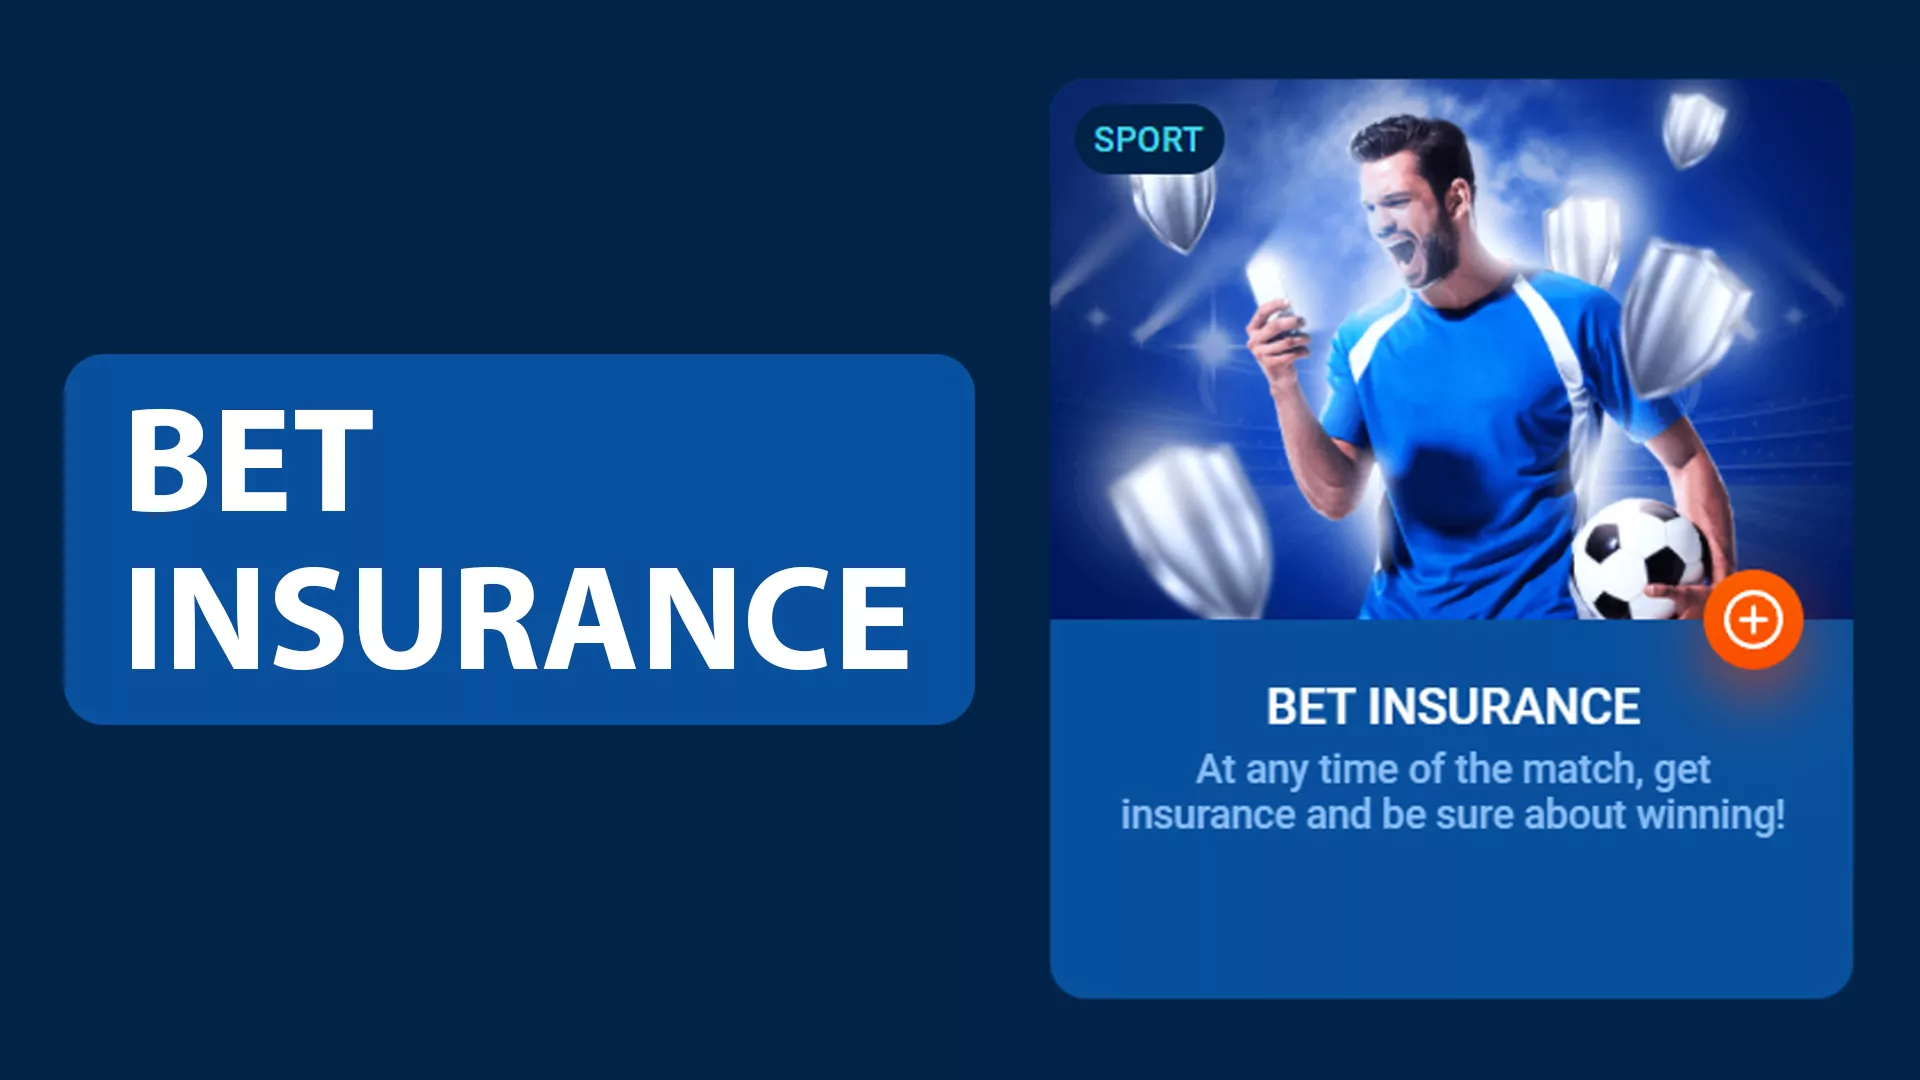 Insure your bet for winning.